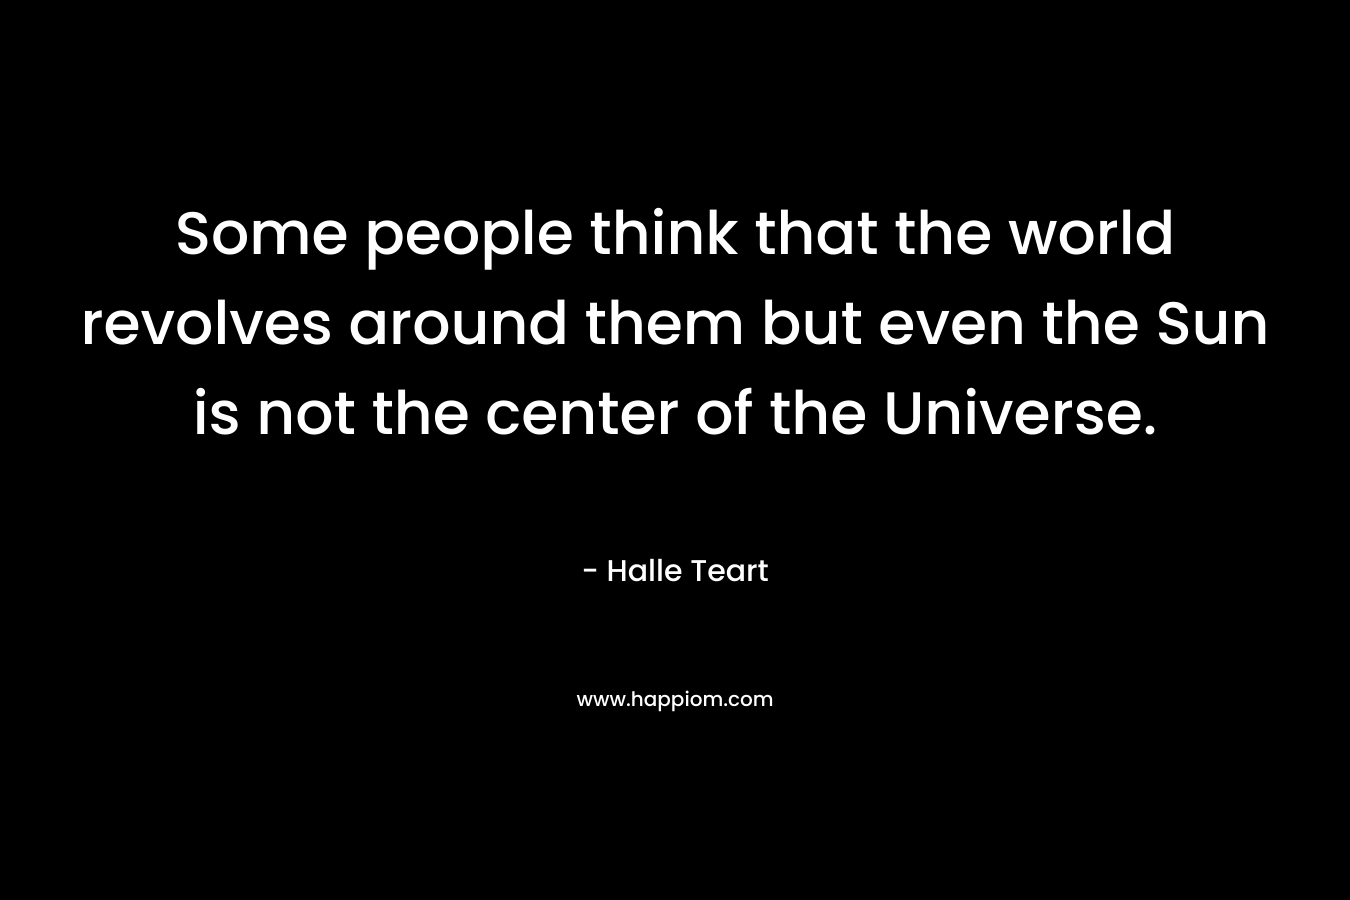 Some people think that the world revolves around them but even the Sun is not the center of the Universe. – Halle Teart